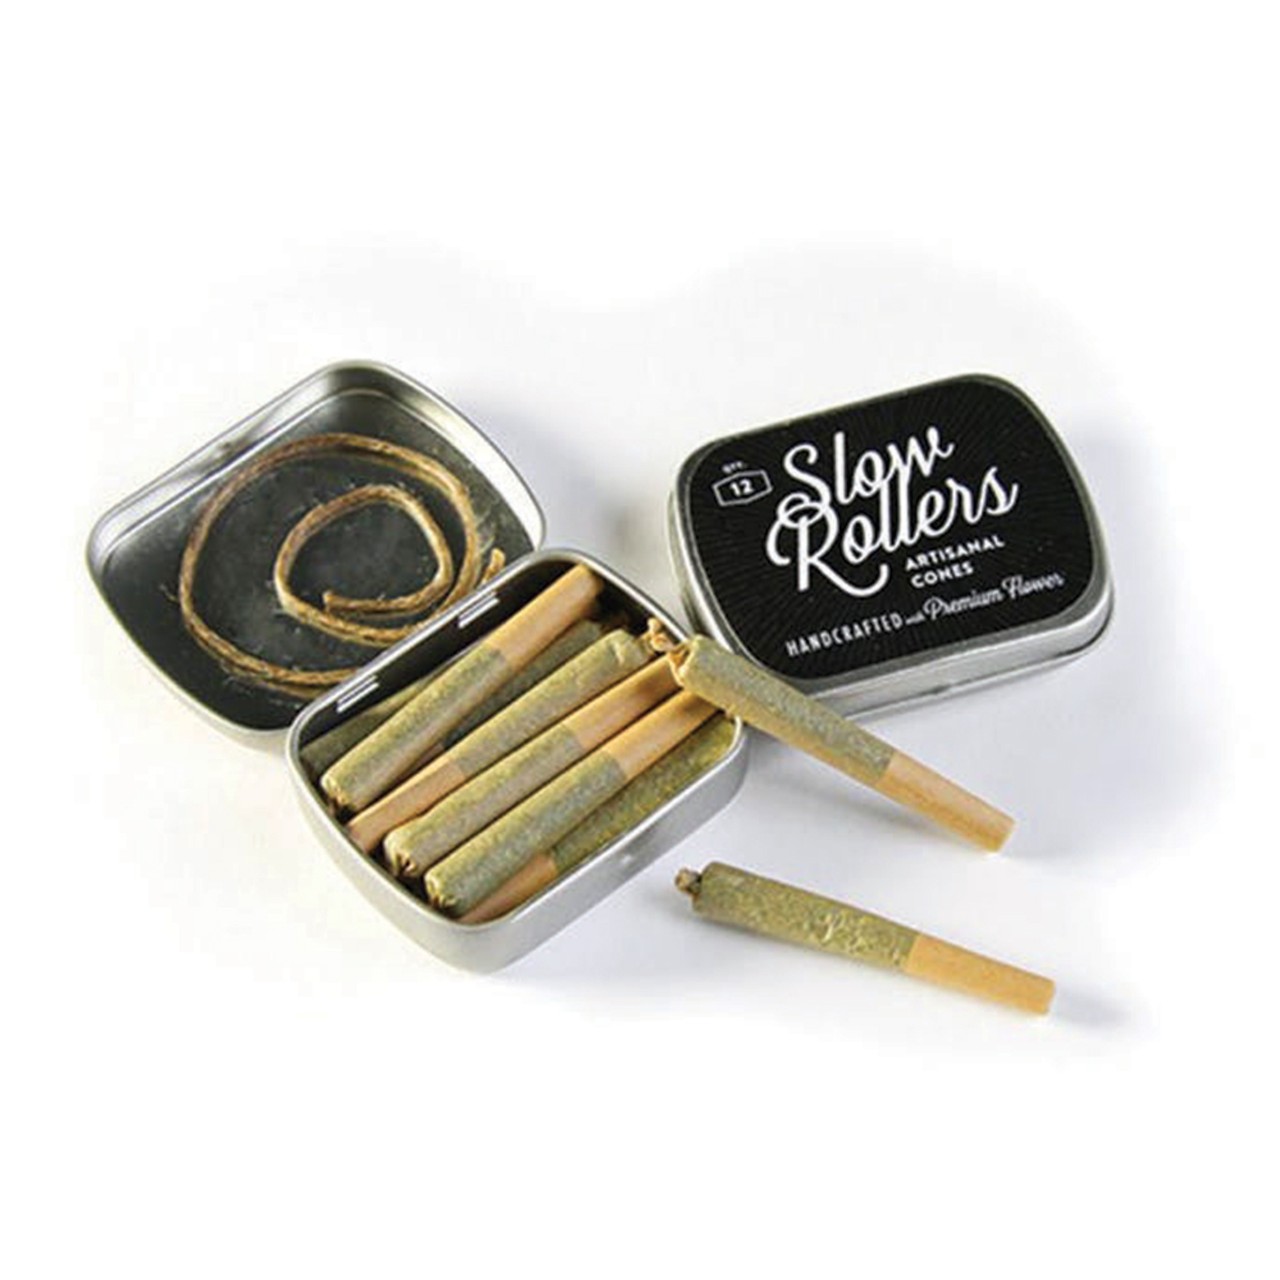 For the Connoisseur Who Can&#146;t Roll a Decent Joint to Save Their Life
Slow Roller 12-pack by Center Creek, $65+
Arbors Wellness, 321 E. Liberty St., Ann Arbor; 734-929-2602; arborswellness.com
In 2021, we no longer have to feel like total dweebs because we can&#146;t roll a smokable joint. Though it remains a point of pride for those who roll bomb-ass joints (we&#146;re looking at you, Seth Rogen), the advent of cones, or those handy pre-filtered tubes you dump weed into, has made life a whole lot easier. However, for those who want to streamline the whole damn process, there are pre-rolls, or, in the case of the Slow Roller 12-pack from Arbors Wellness, there are fancy pre-rolls. Starting at $65, these compact pre-rolls come in their own tin and include a total of an eighth of herb. For $75, you could find yourself smoking Six Labs&#146; Chem D, which packs a 30.9% THC punch at which point someone might as well pre-roll you straight to bed.